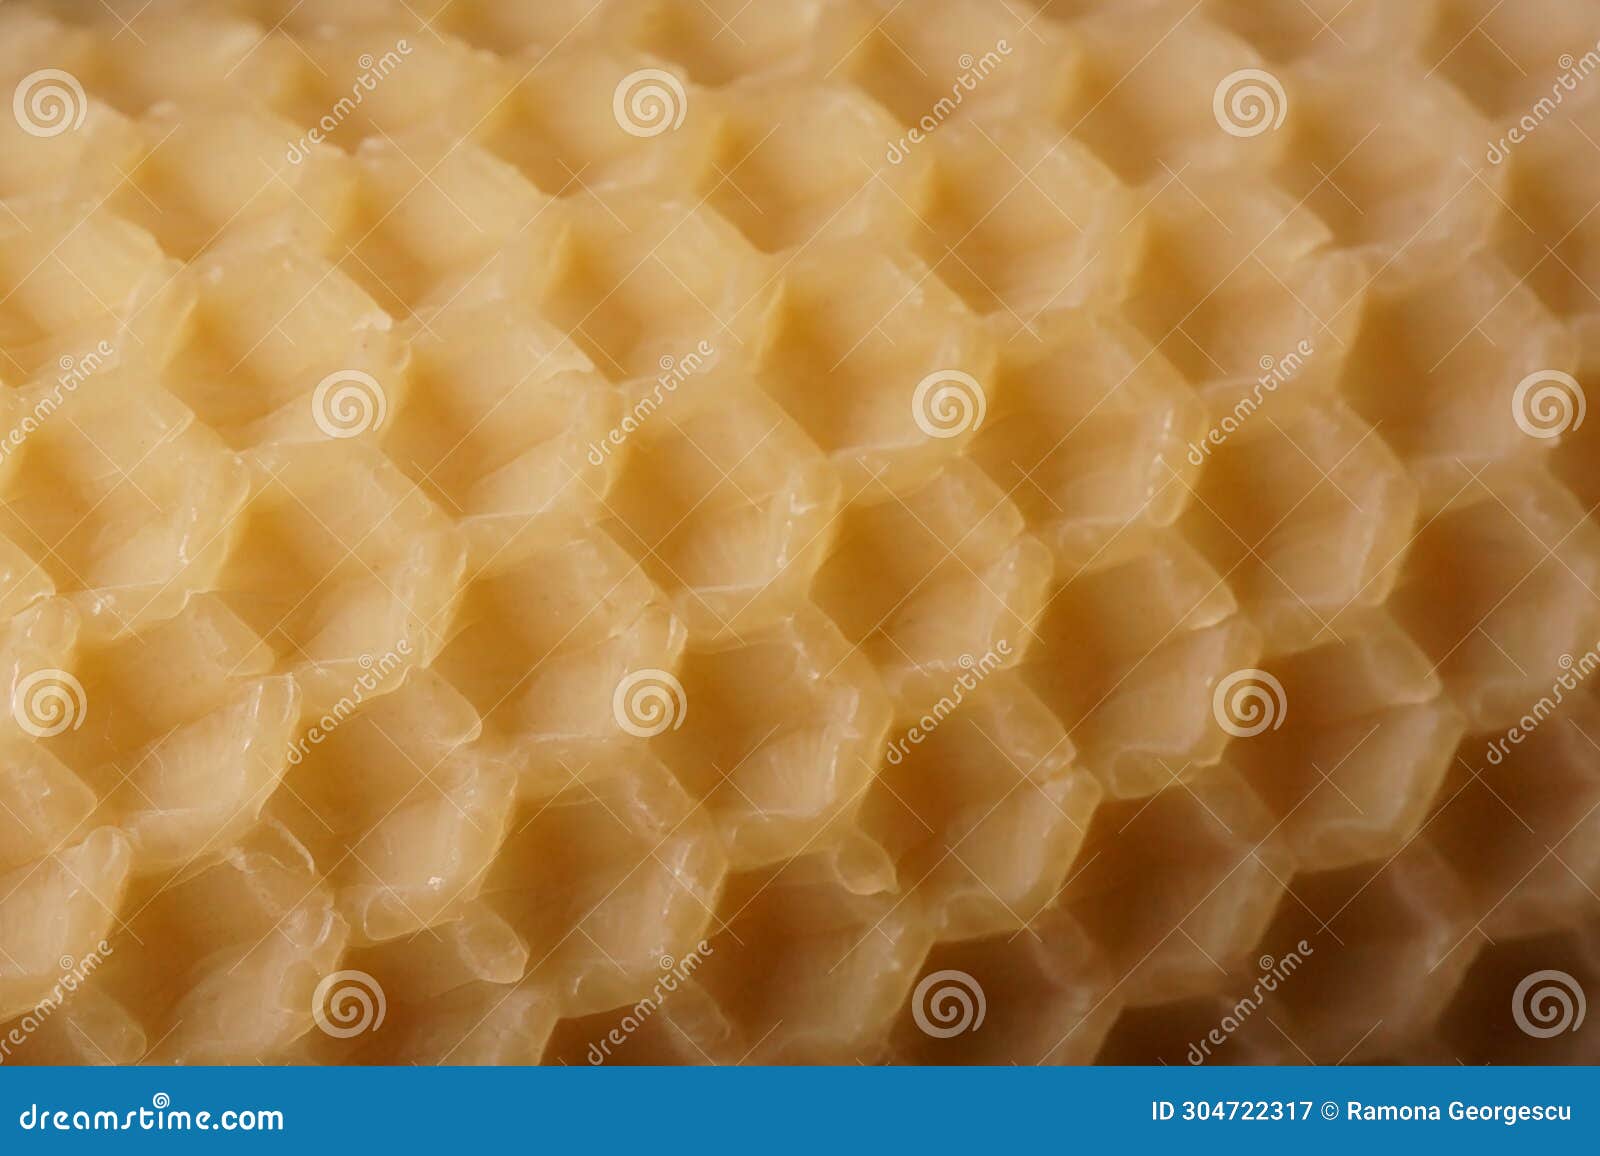 macro background with an old sheet of natural beeswax sheet of comb foundation with a hexagonal pattern cera alba